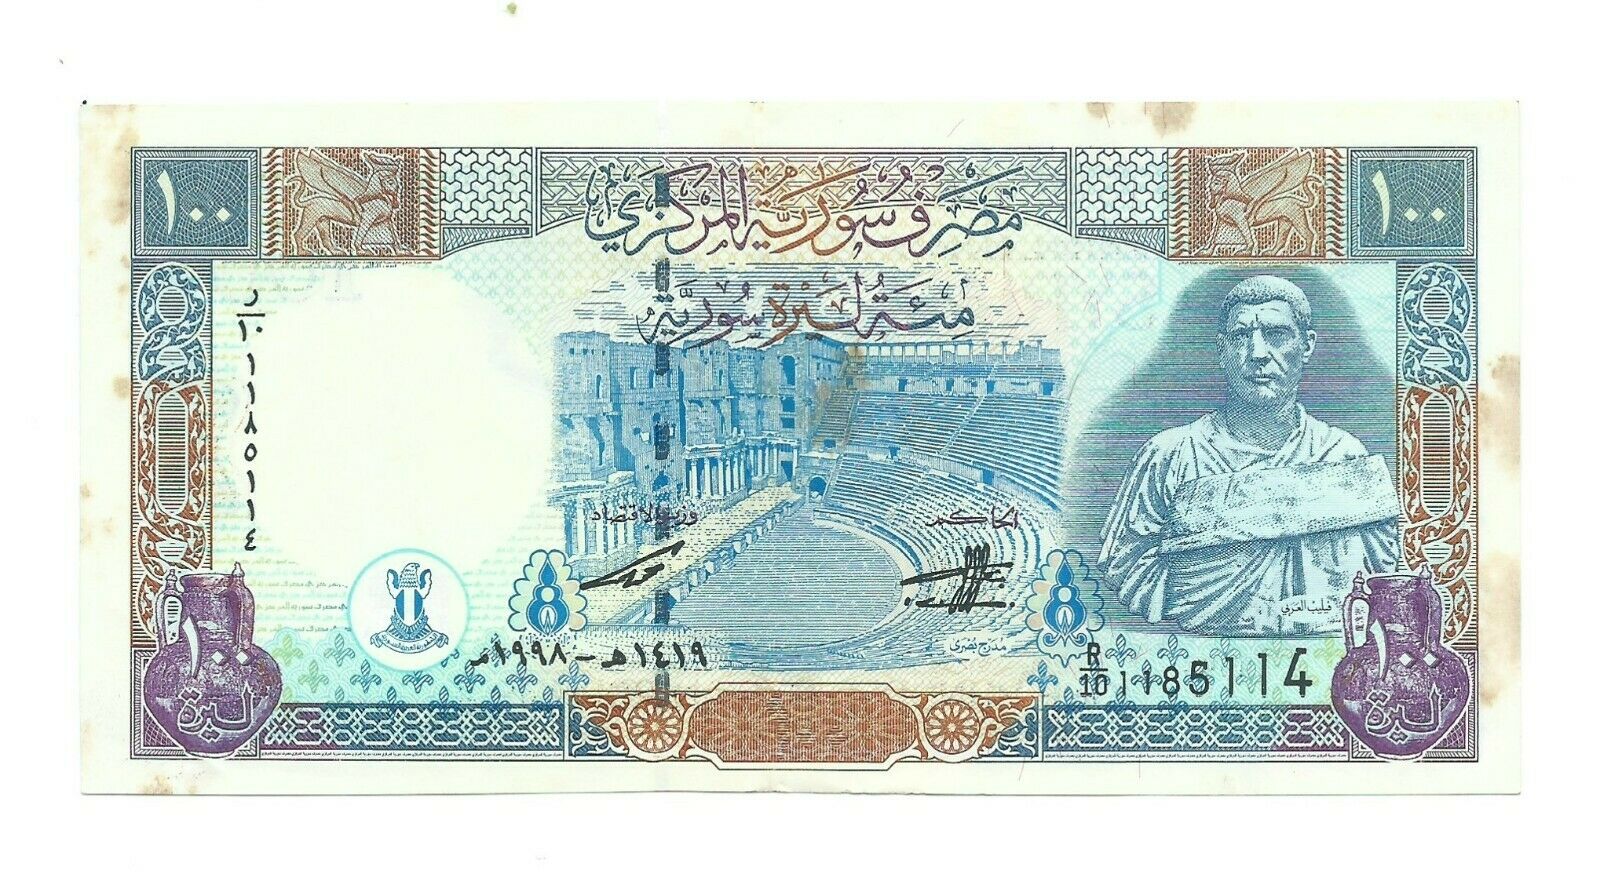 1998 Syria Banknote Collector 100 Pounds # 108